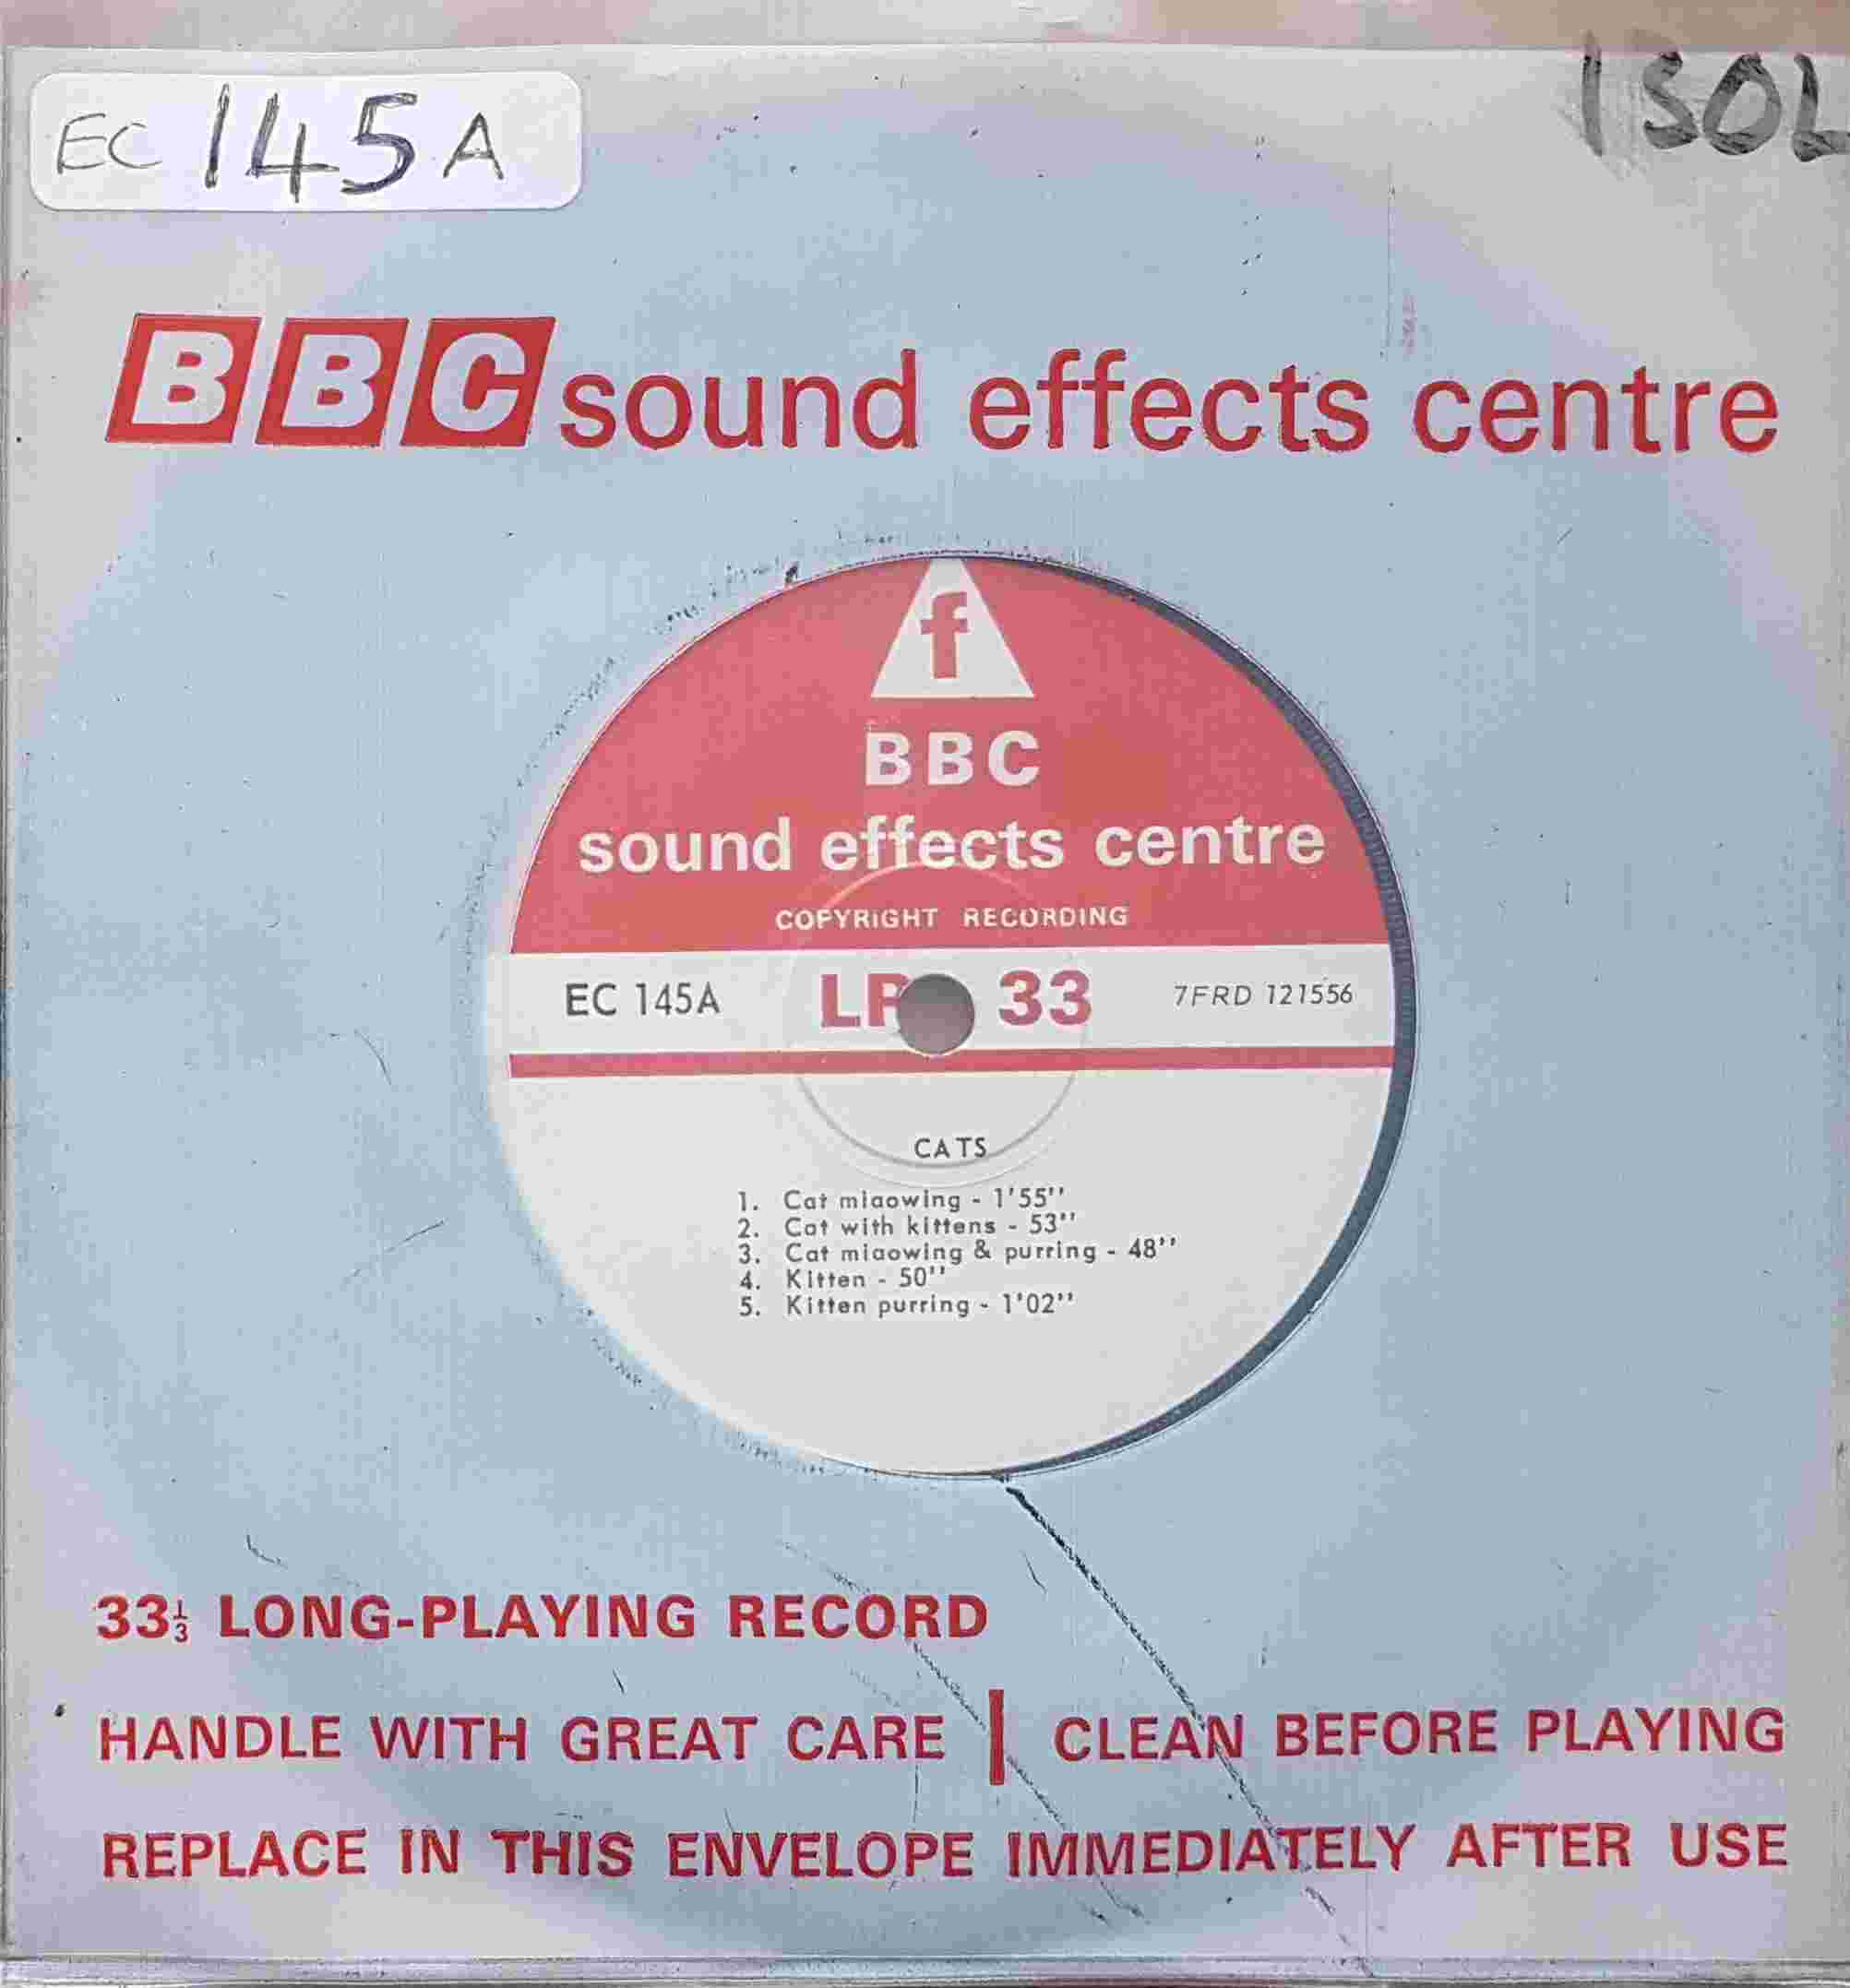 Picture of EC 145A Cats by artist Not registered from the BBC singles - Records and Tapes library